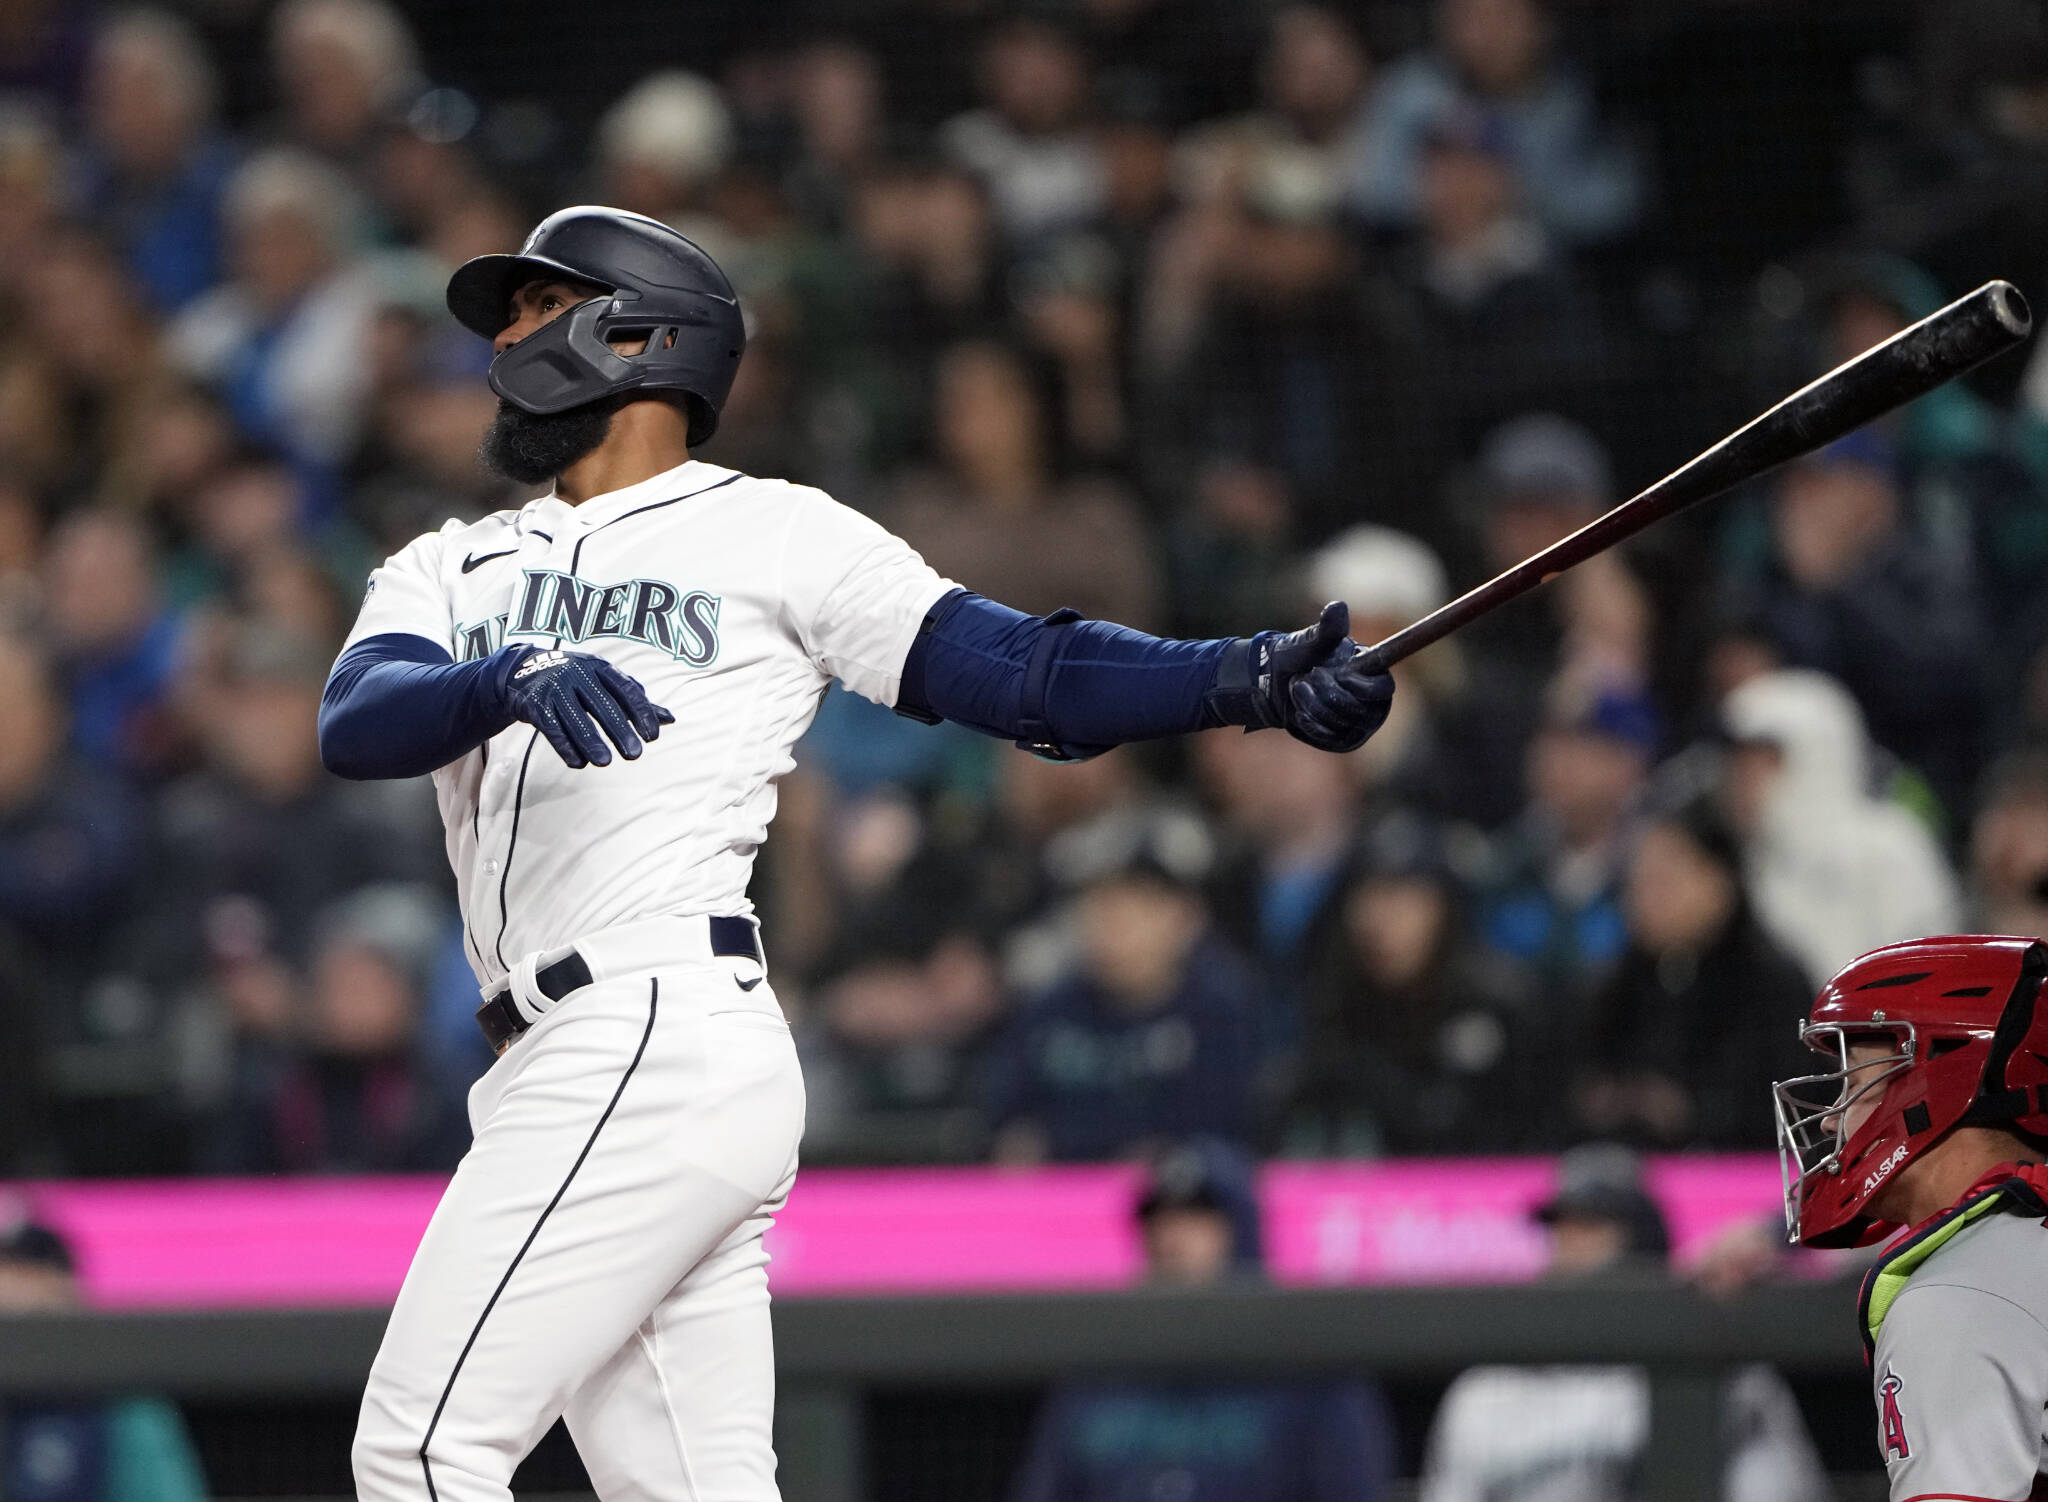 Rodríguez homers and Mariners extend winning streak to 8 games by